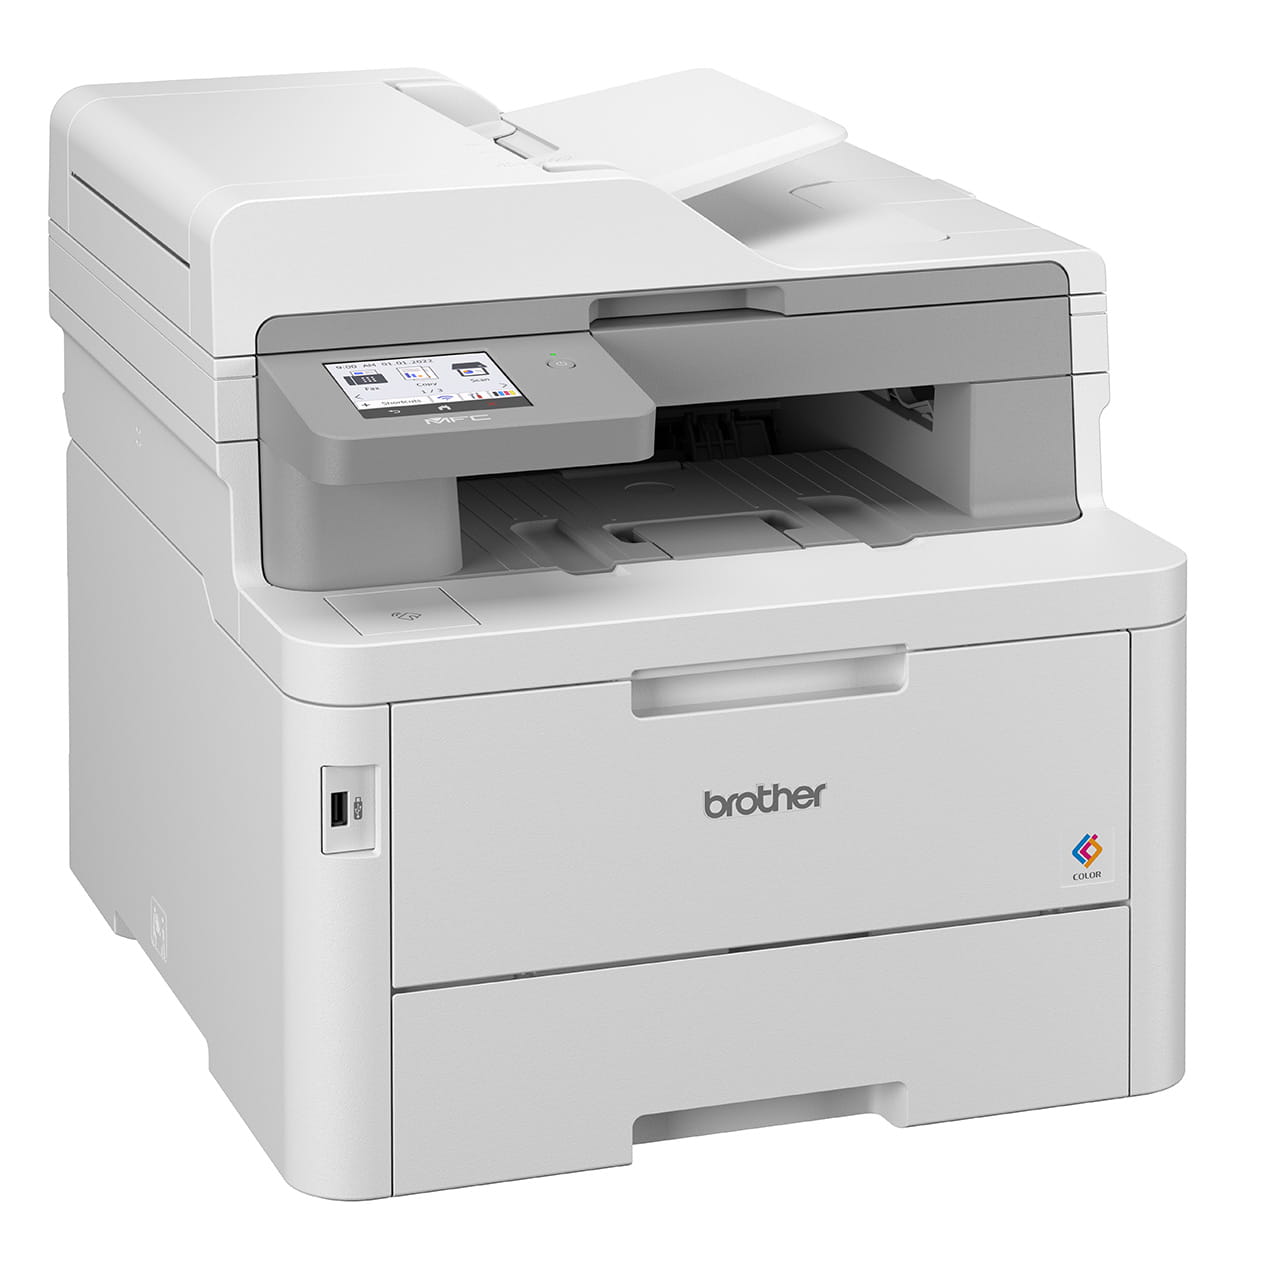 Brother MFC-L8390CDW Colour Laser Printer Right Side View